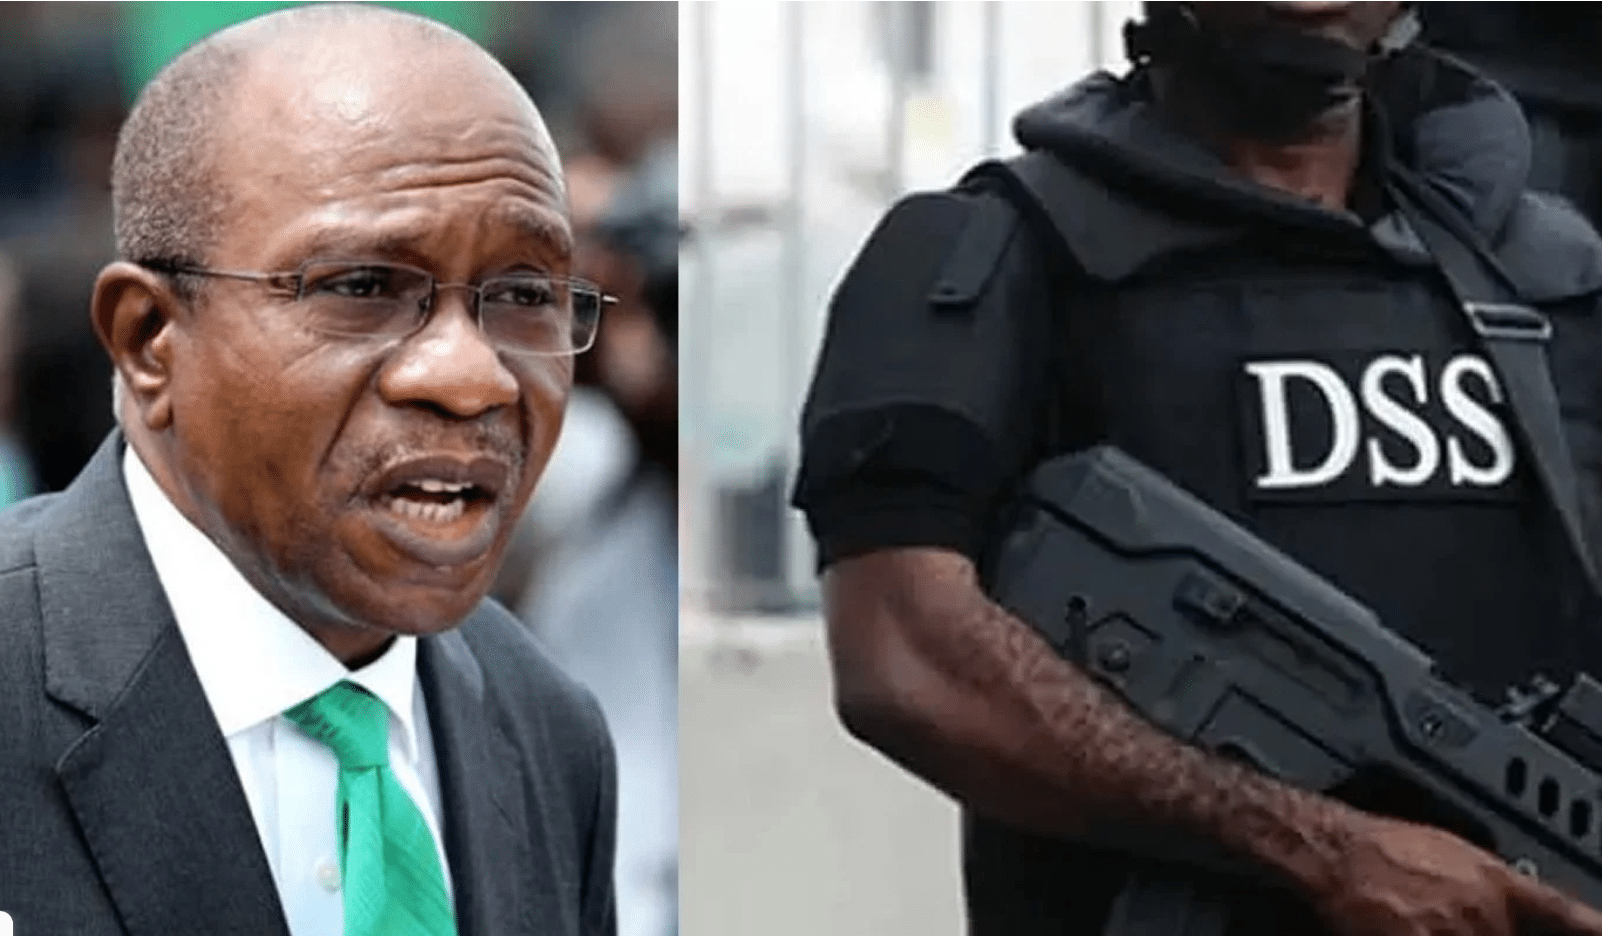 Nigerians React As DSS 'Links' Suspended CBN Governor To IPOB